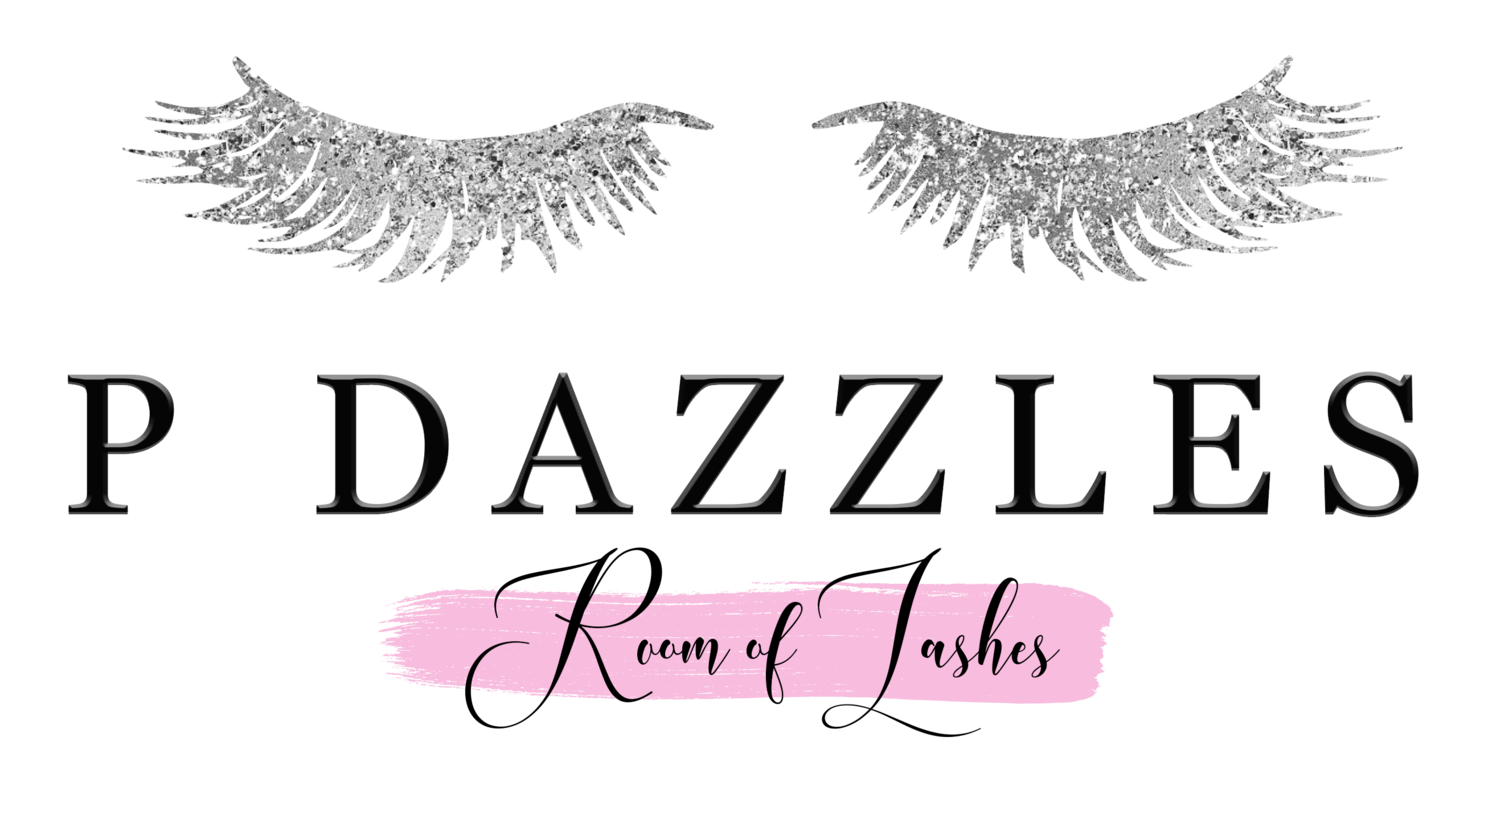 PDazzles Online Store